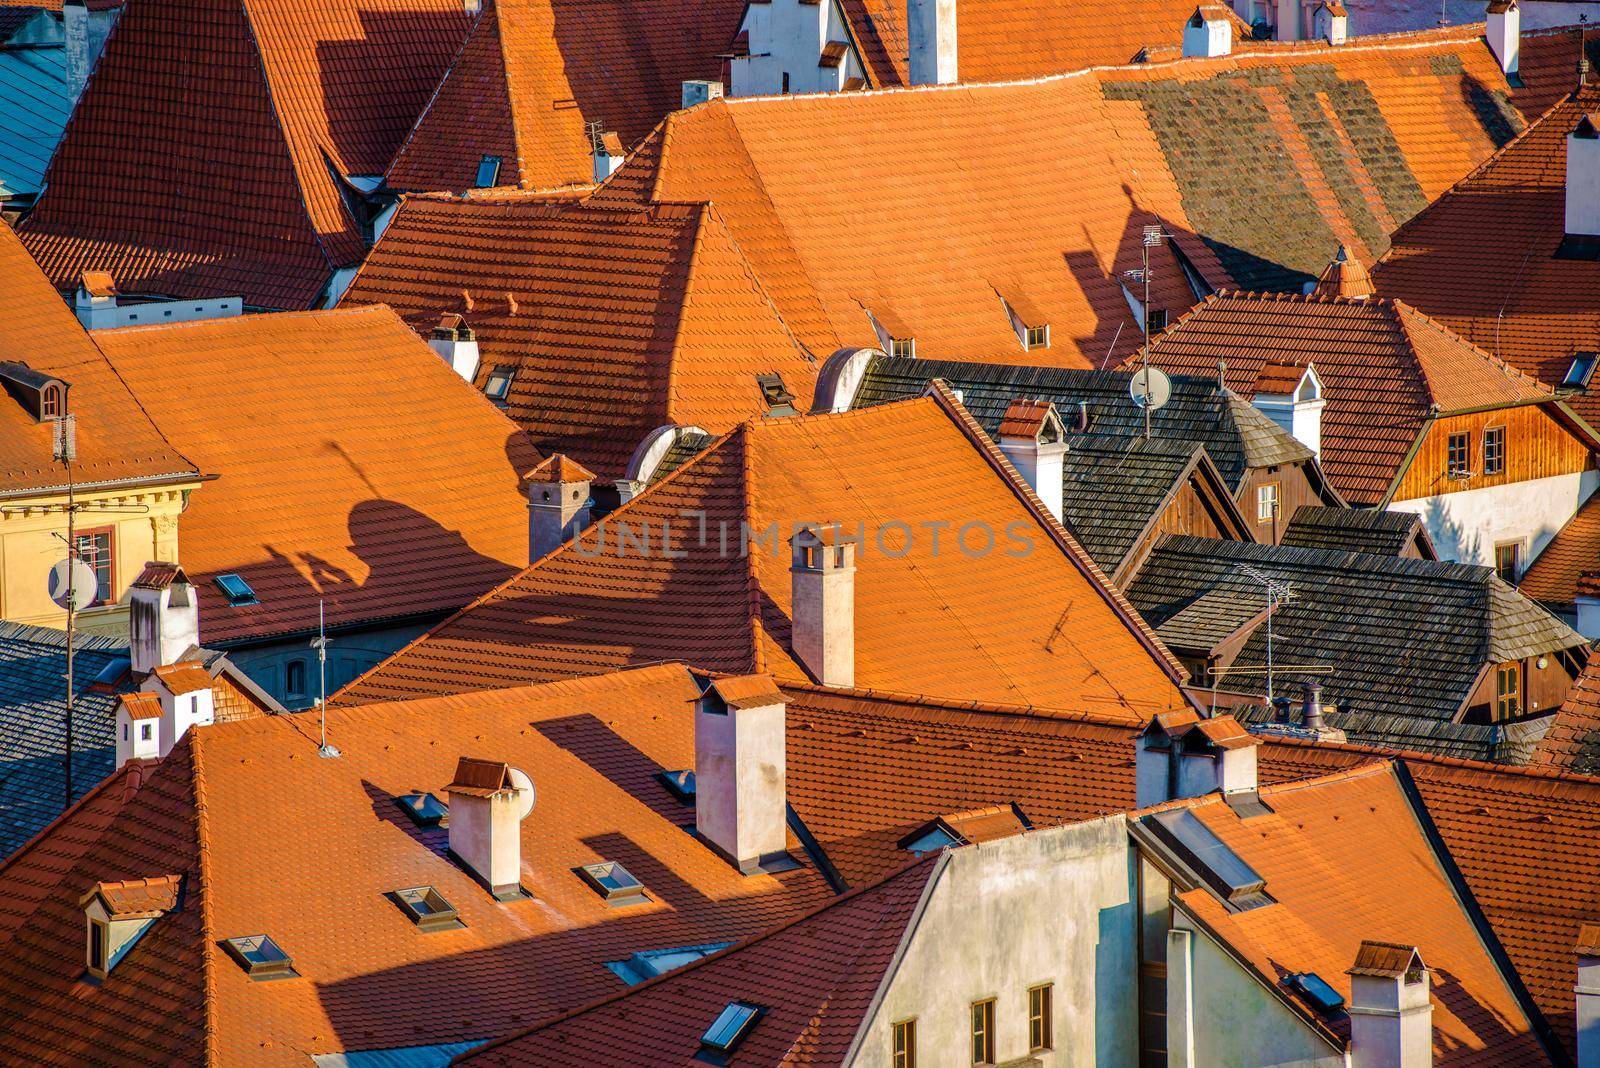 Aerial View Of Red And Brown Rooftops Of Old Buildings In Town.